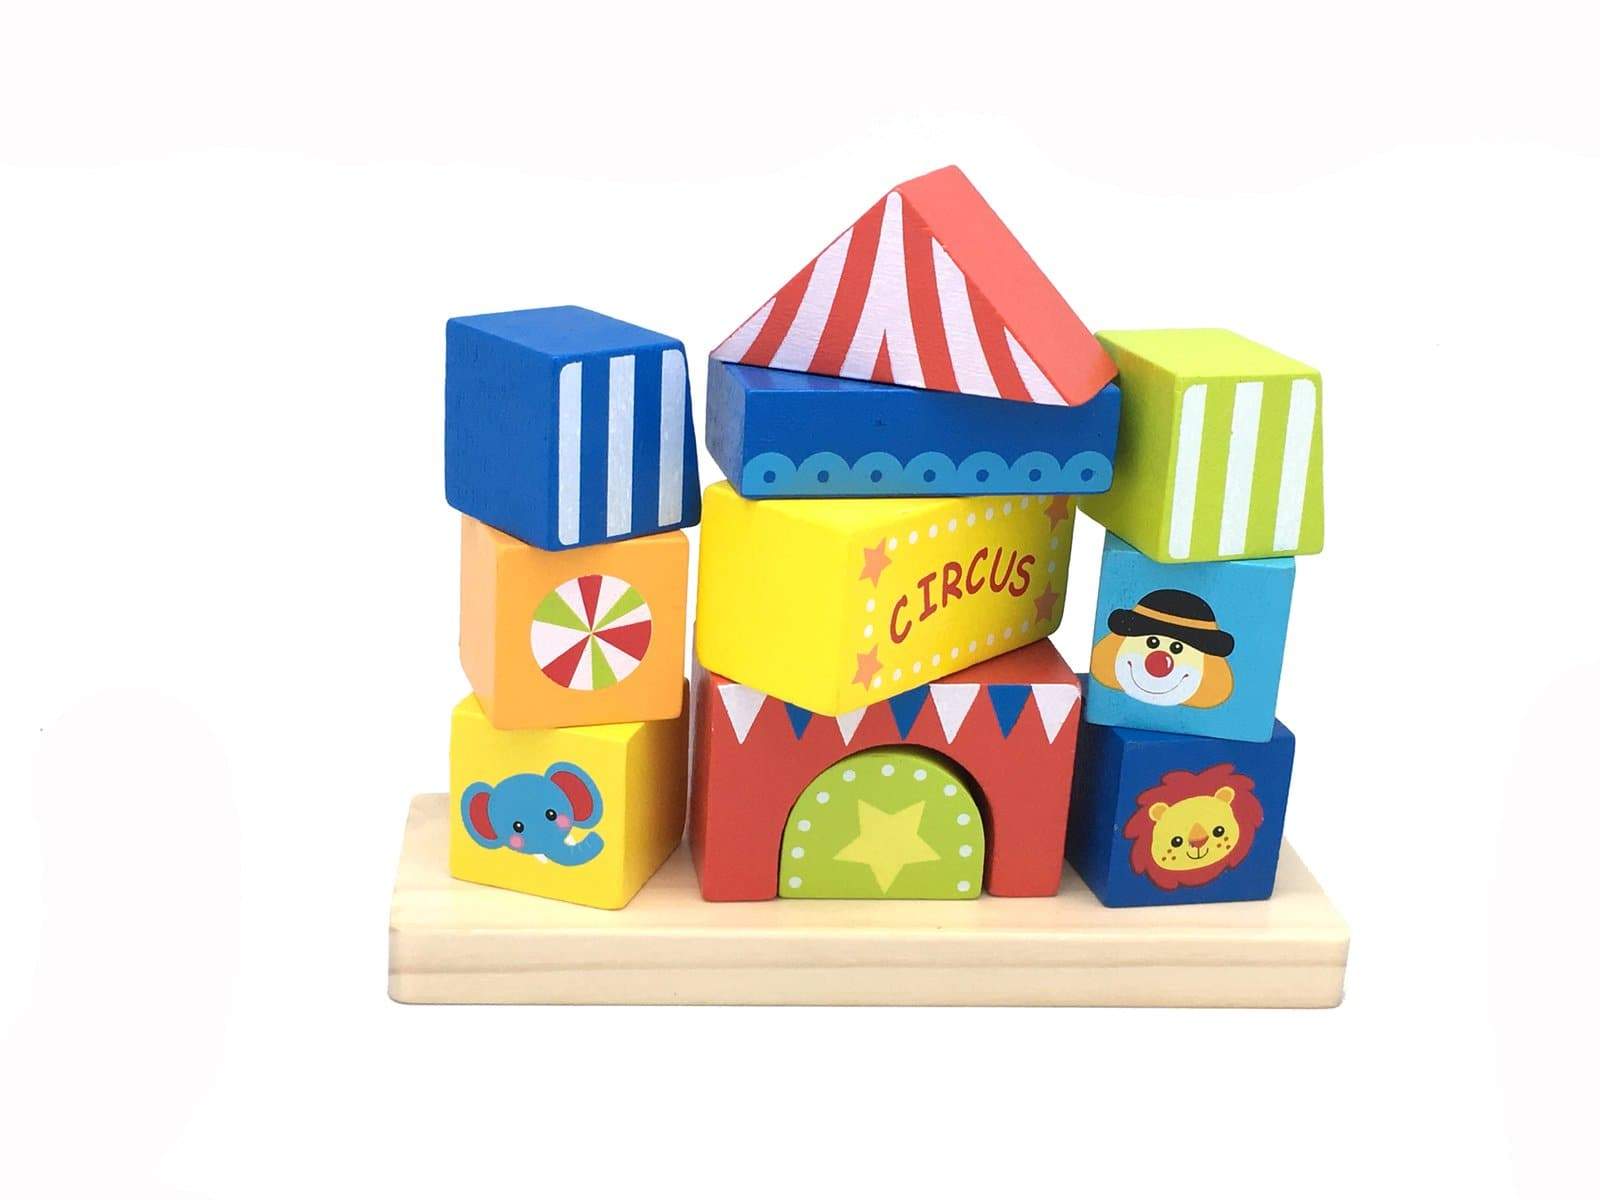 toys for infant Circus Block Tower